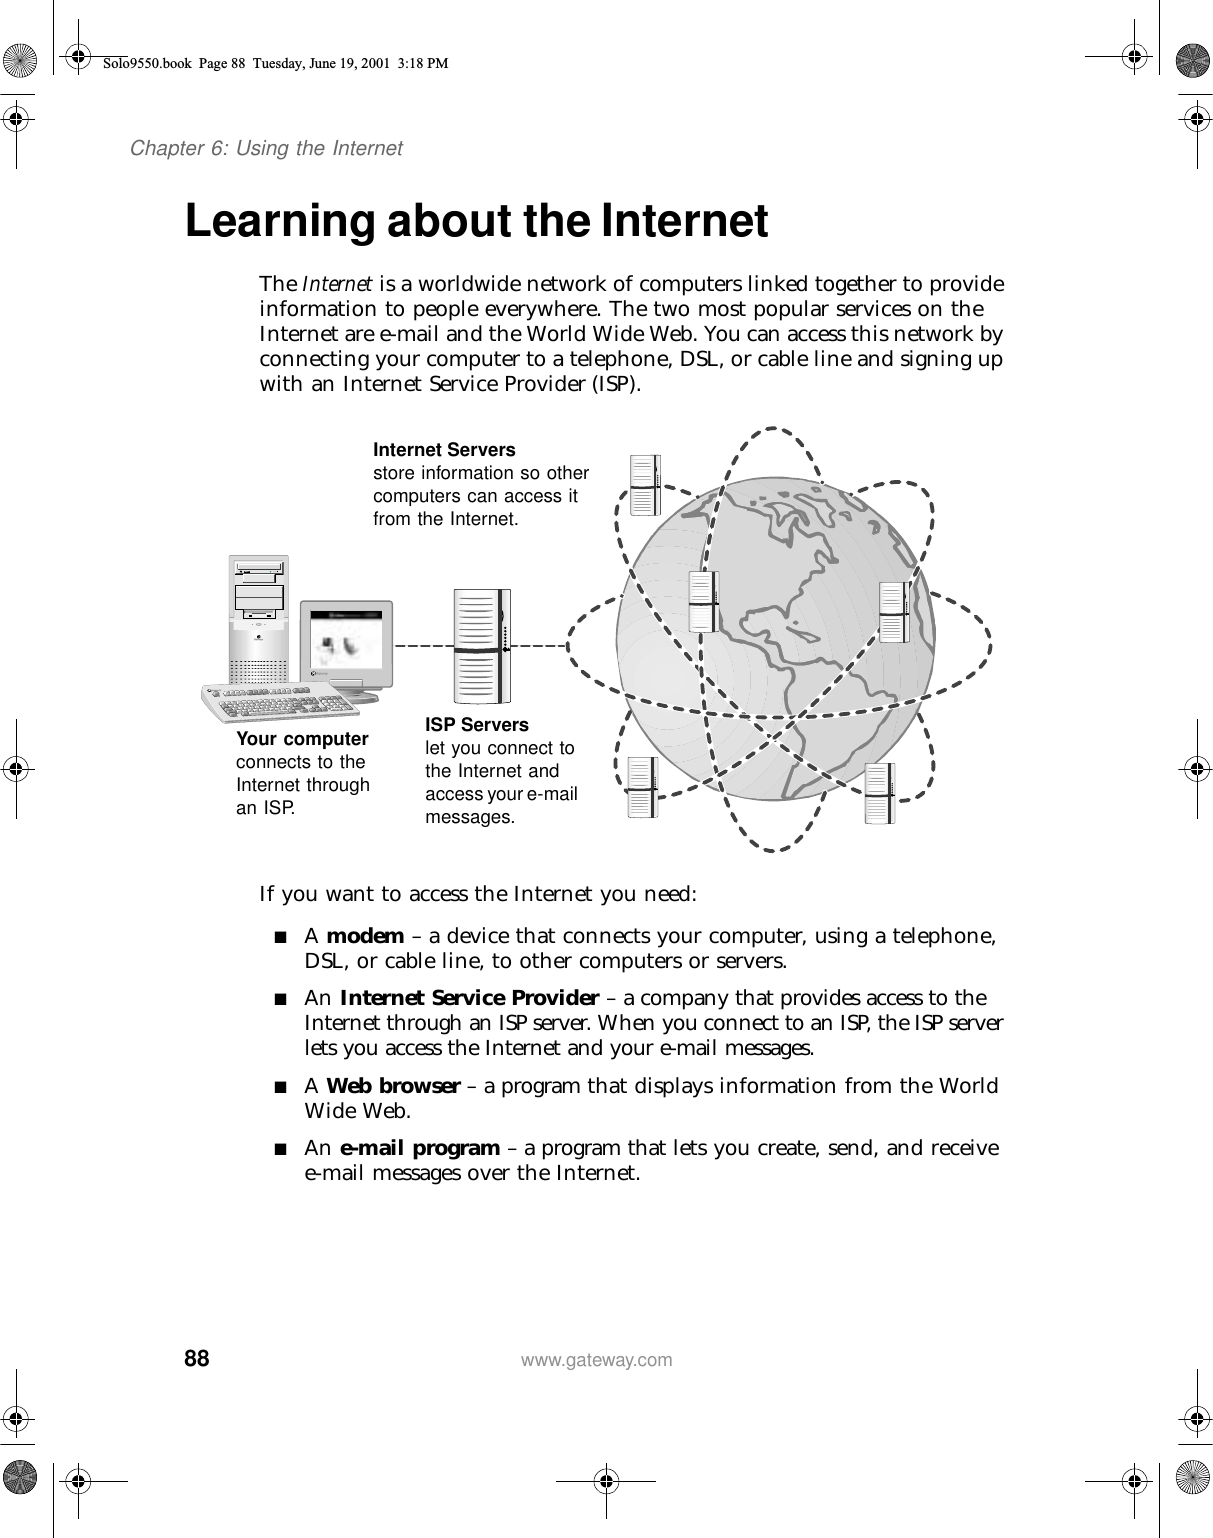 88Chapter 6: Using the Internetwww.gateway.comLearning about the InternetThe Internet is a worldwide network of computers linked together to provide information to people everywhere. The two most popular services on the Internet are e-mail and the World Wide Web. You can access this network by connecting your computer to a telephone, DSL, or cable line and signing up with an Internet Service Provider (ISP).If you want to access the Internet you need:■A modem – a device that connects your computer, using a telephone, DSL, or cable line, to other computers or servers.■An Internet Service Provider – a company that provides access to the Internet through an ISP server. When you connect to an ISP, the ISP server lets you access the Internet and your e-mail messages.■A Web browser – a program that displays information from the World Wide Web.■An e-mail program – a program that lets you create, send, and receive e-mail messages over the Internet.Your computer connects to the Internet through an ISP.ISP Servers let you connect to the Internet and access your e-mail messages.Internet Servers store information so other computers can access it from the Internet.Solo9550.book Page 88 Tuesday, June 19, 2001 3:18 PM